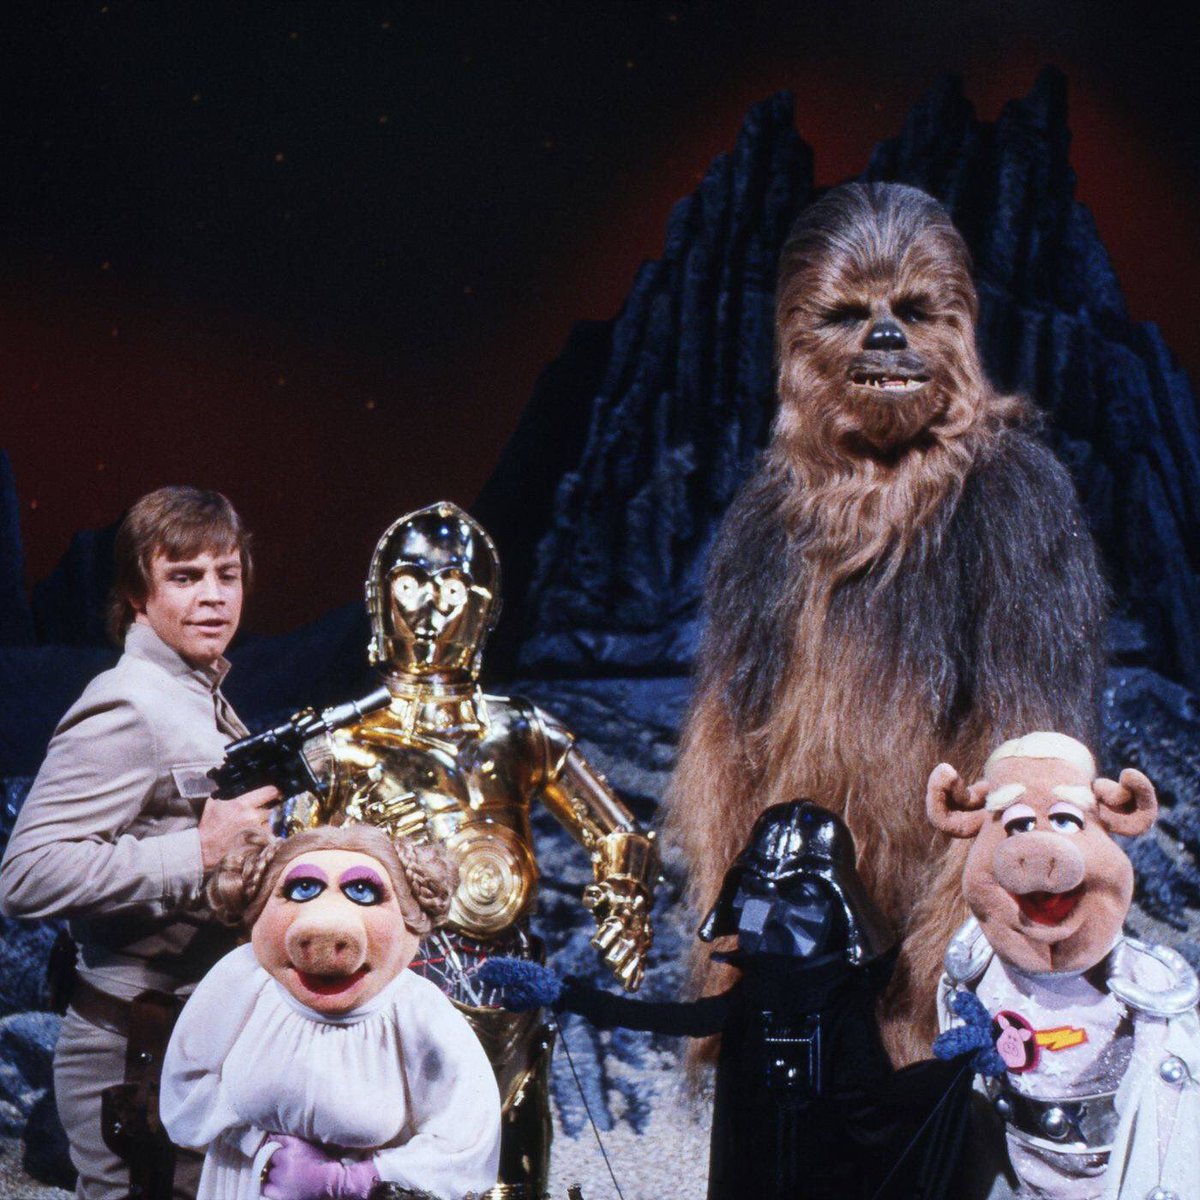 Mark Hamill as Luke Skywalker, Anthony Daniels as C-3PO, and Peter Mayhew as Chewbacca on The Muppet Show, season 4, episode 17, broadcast February 29, 1980. https://t.co/mUhZ5n7WHZ